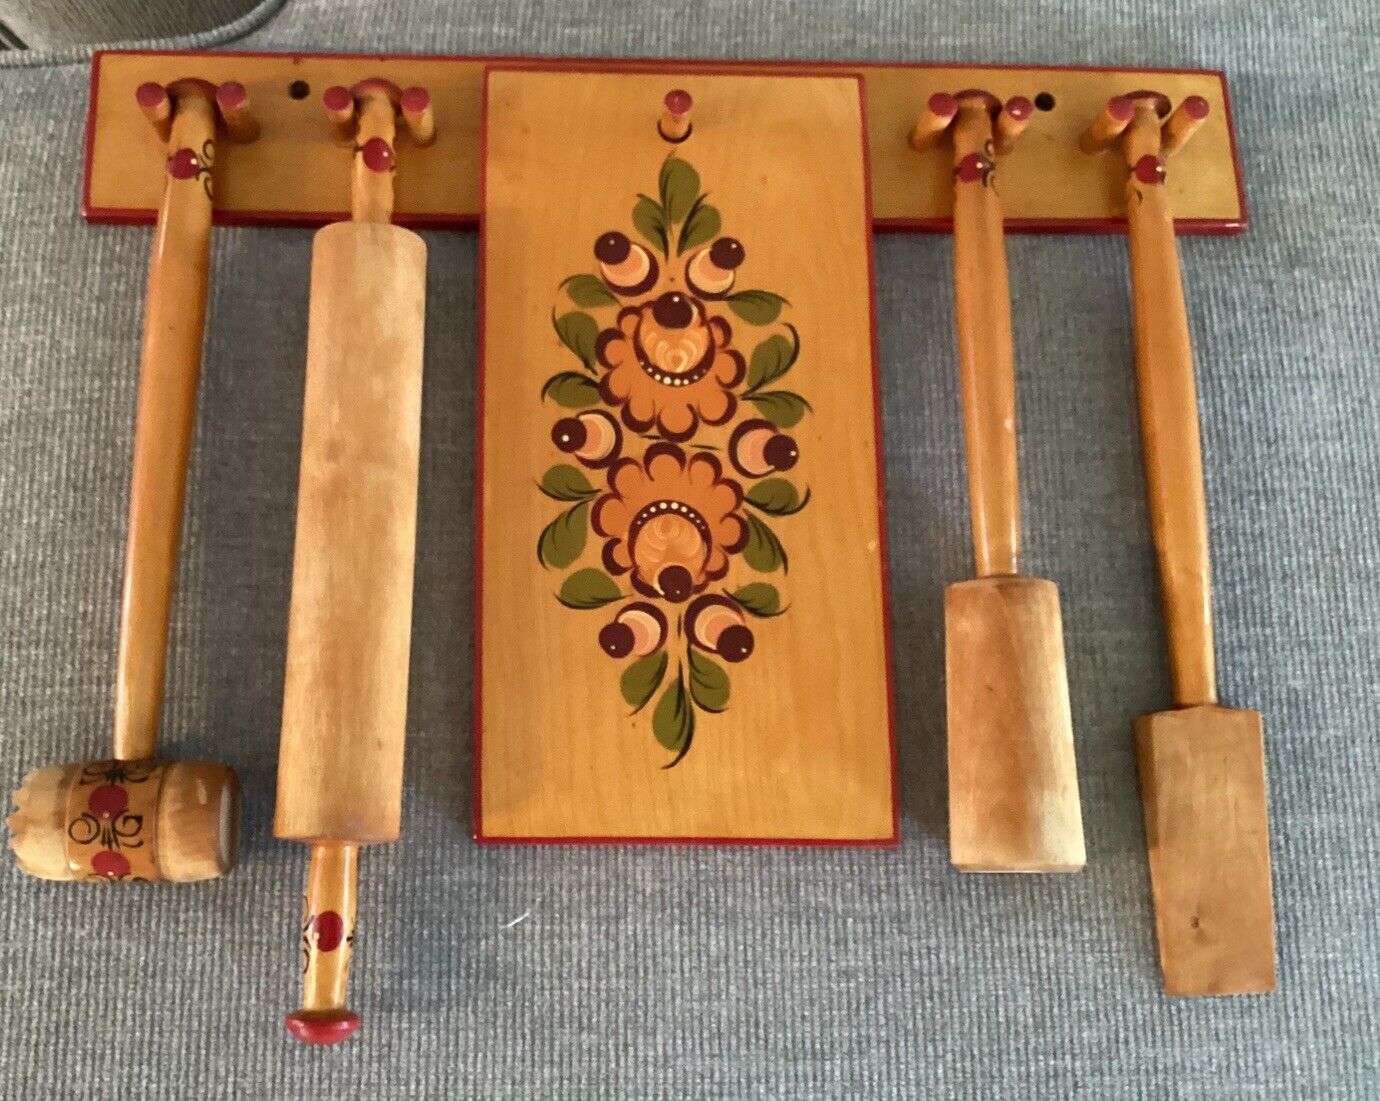 Vintage Khokhloma Hand Painted Russian Folk Art Wooden Wall Rack With Utensils